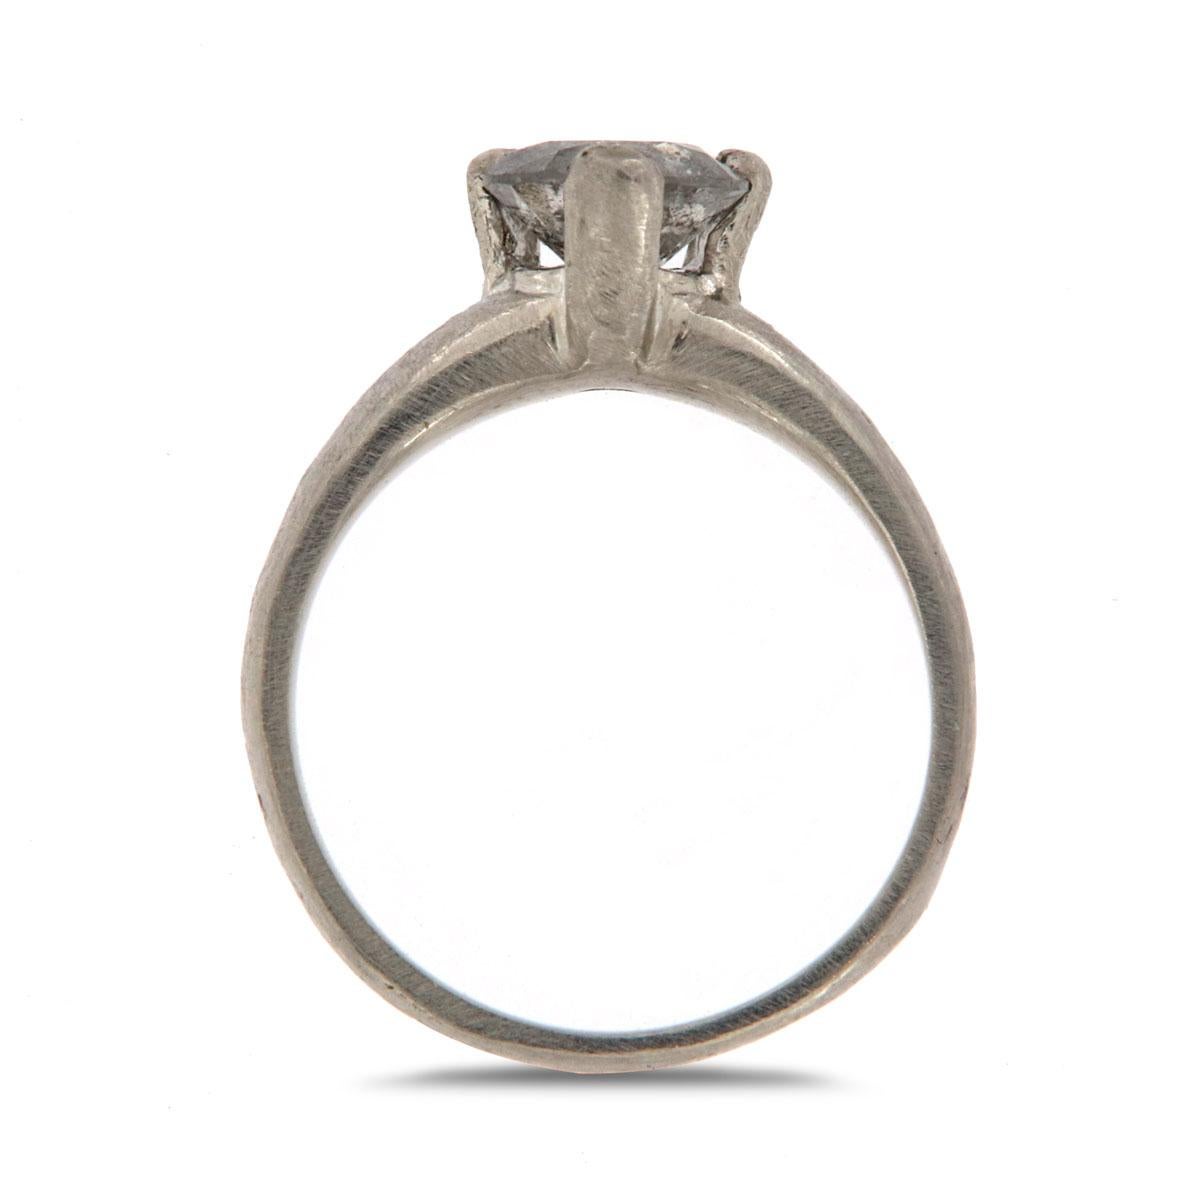 This Unique One-Of-A-Kind ring features a 0.95 carat of round Salt & Pepper natural diamond set in three wide prongs. The slightly hammered shank and its satin finish give it the alluring feeling of mother nature. It's Earthy and organic. Experience